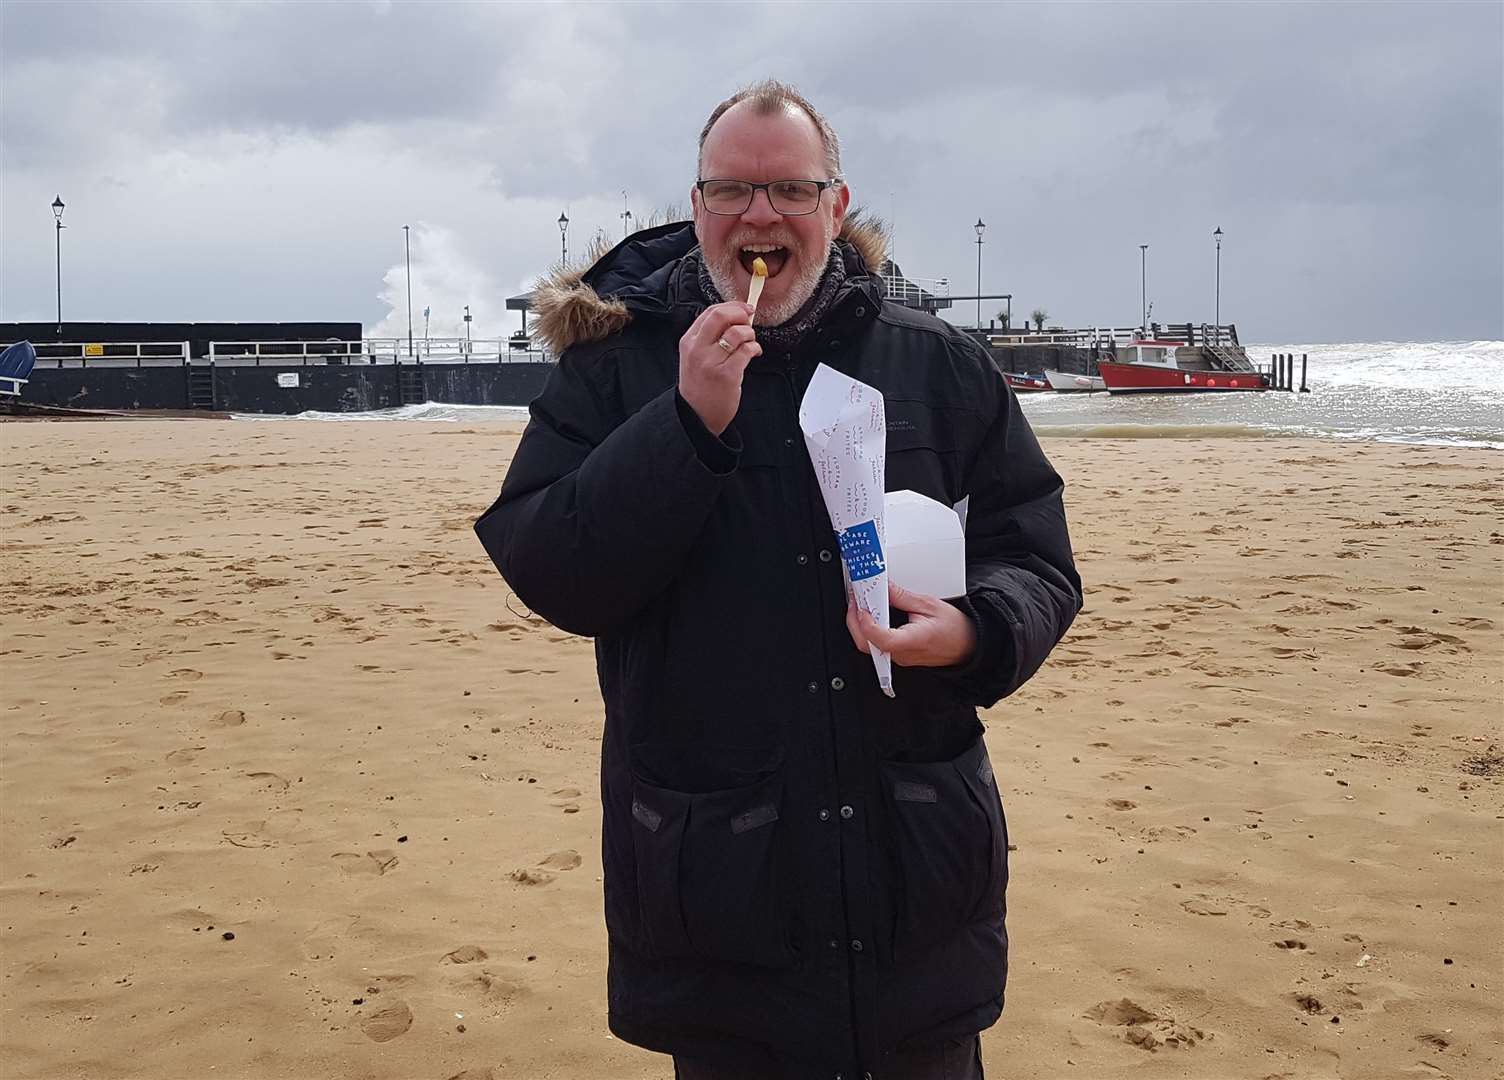 Your reviewer braves the elements (please note the waves break on the seawall behind) to eat fries